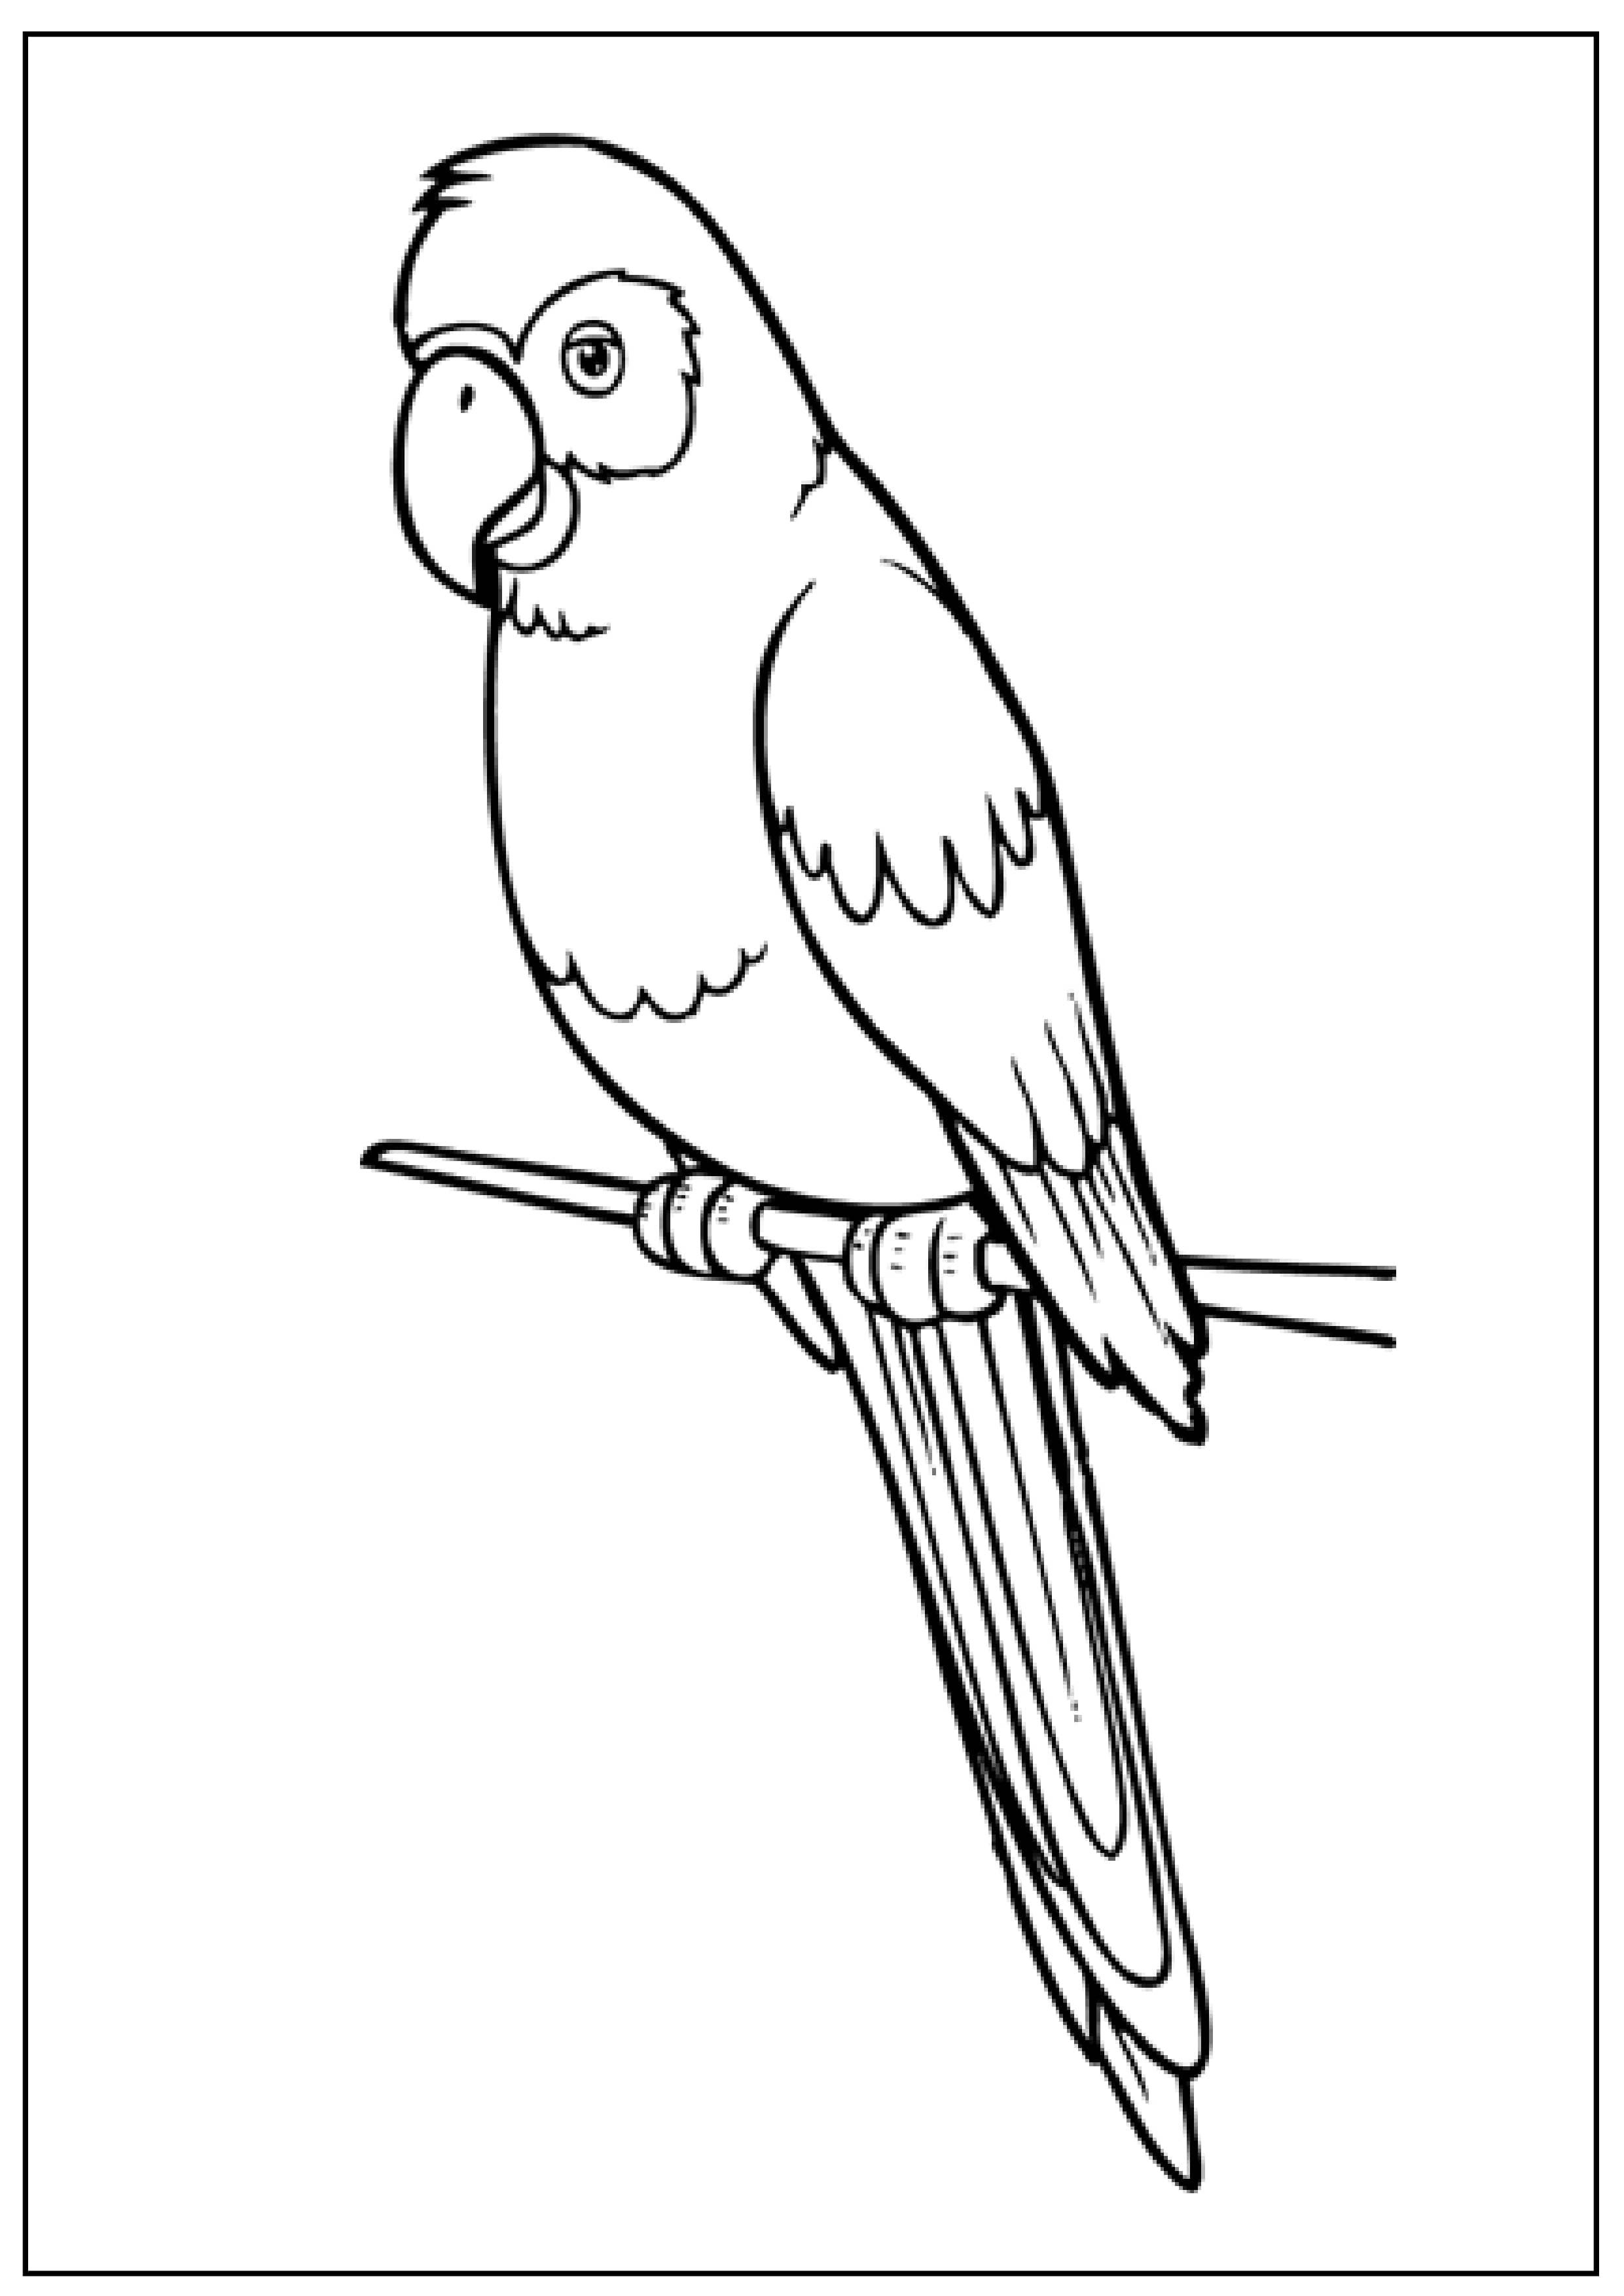 Download Free Coloring Pages | Fox Meadows Art